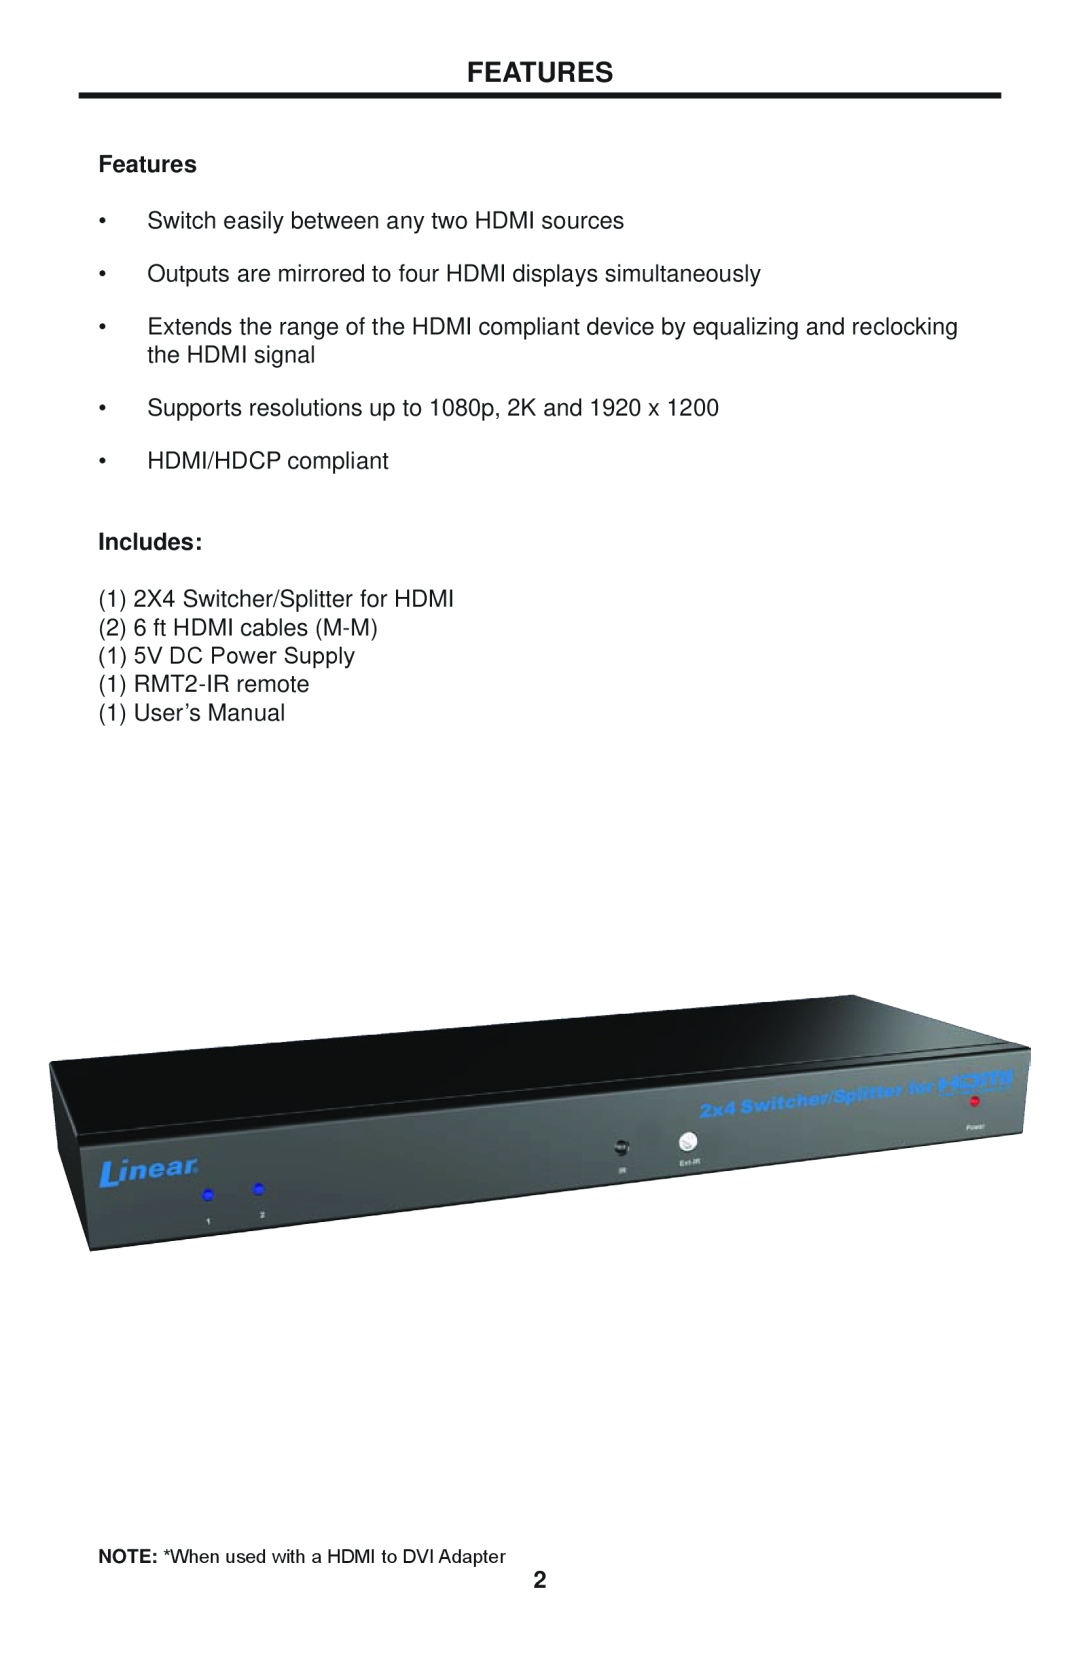 Linear HDMI-SW-2X4M user manual Features, Includes 